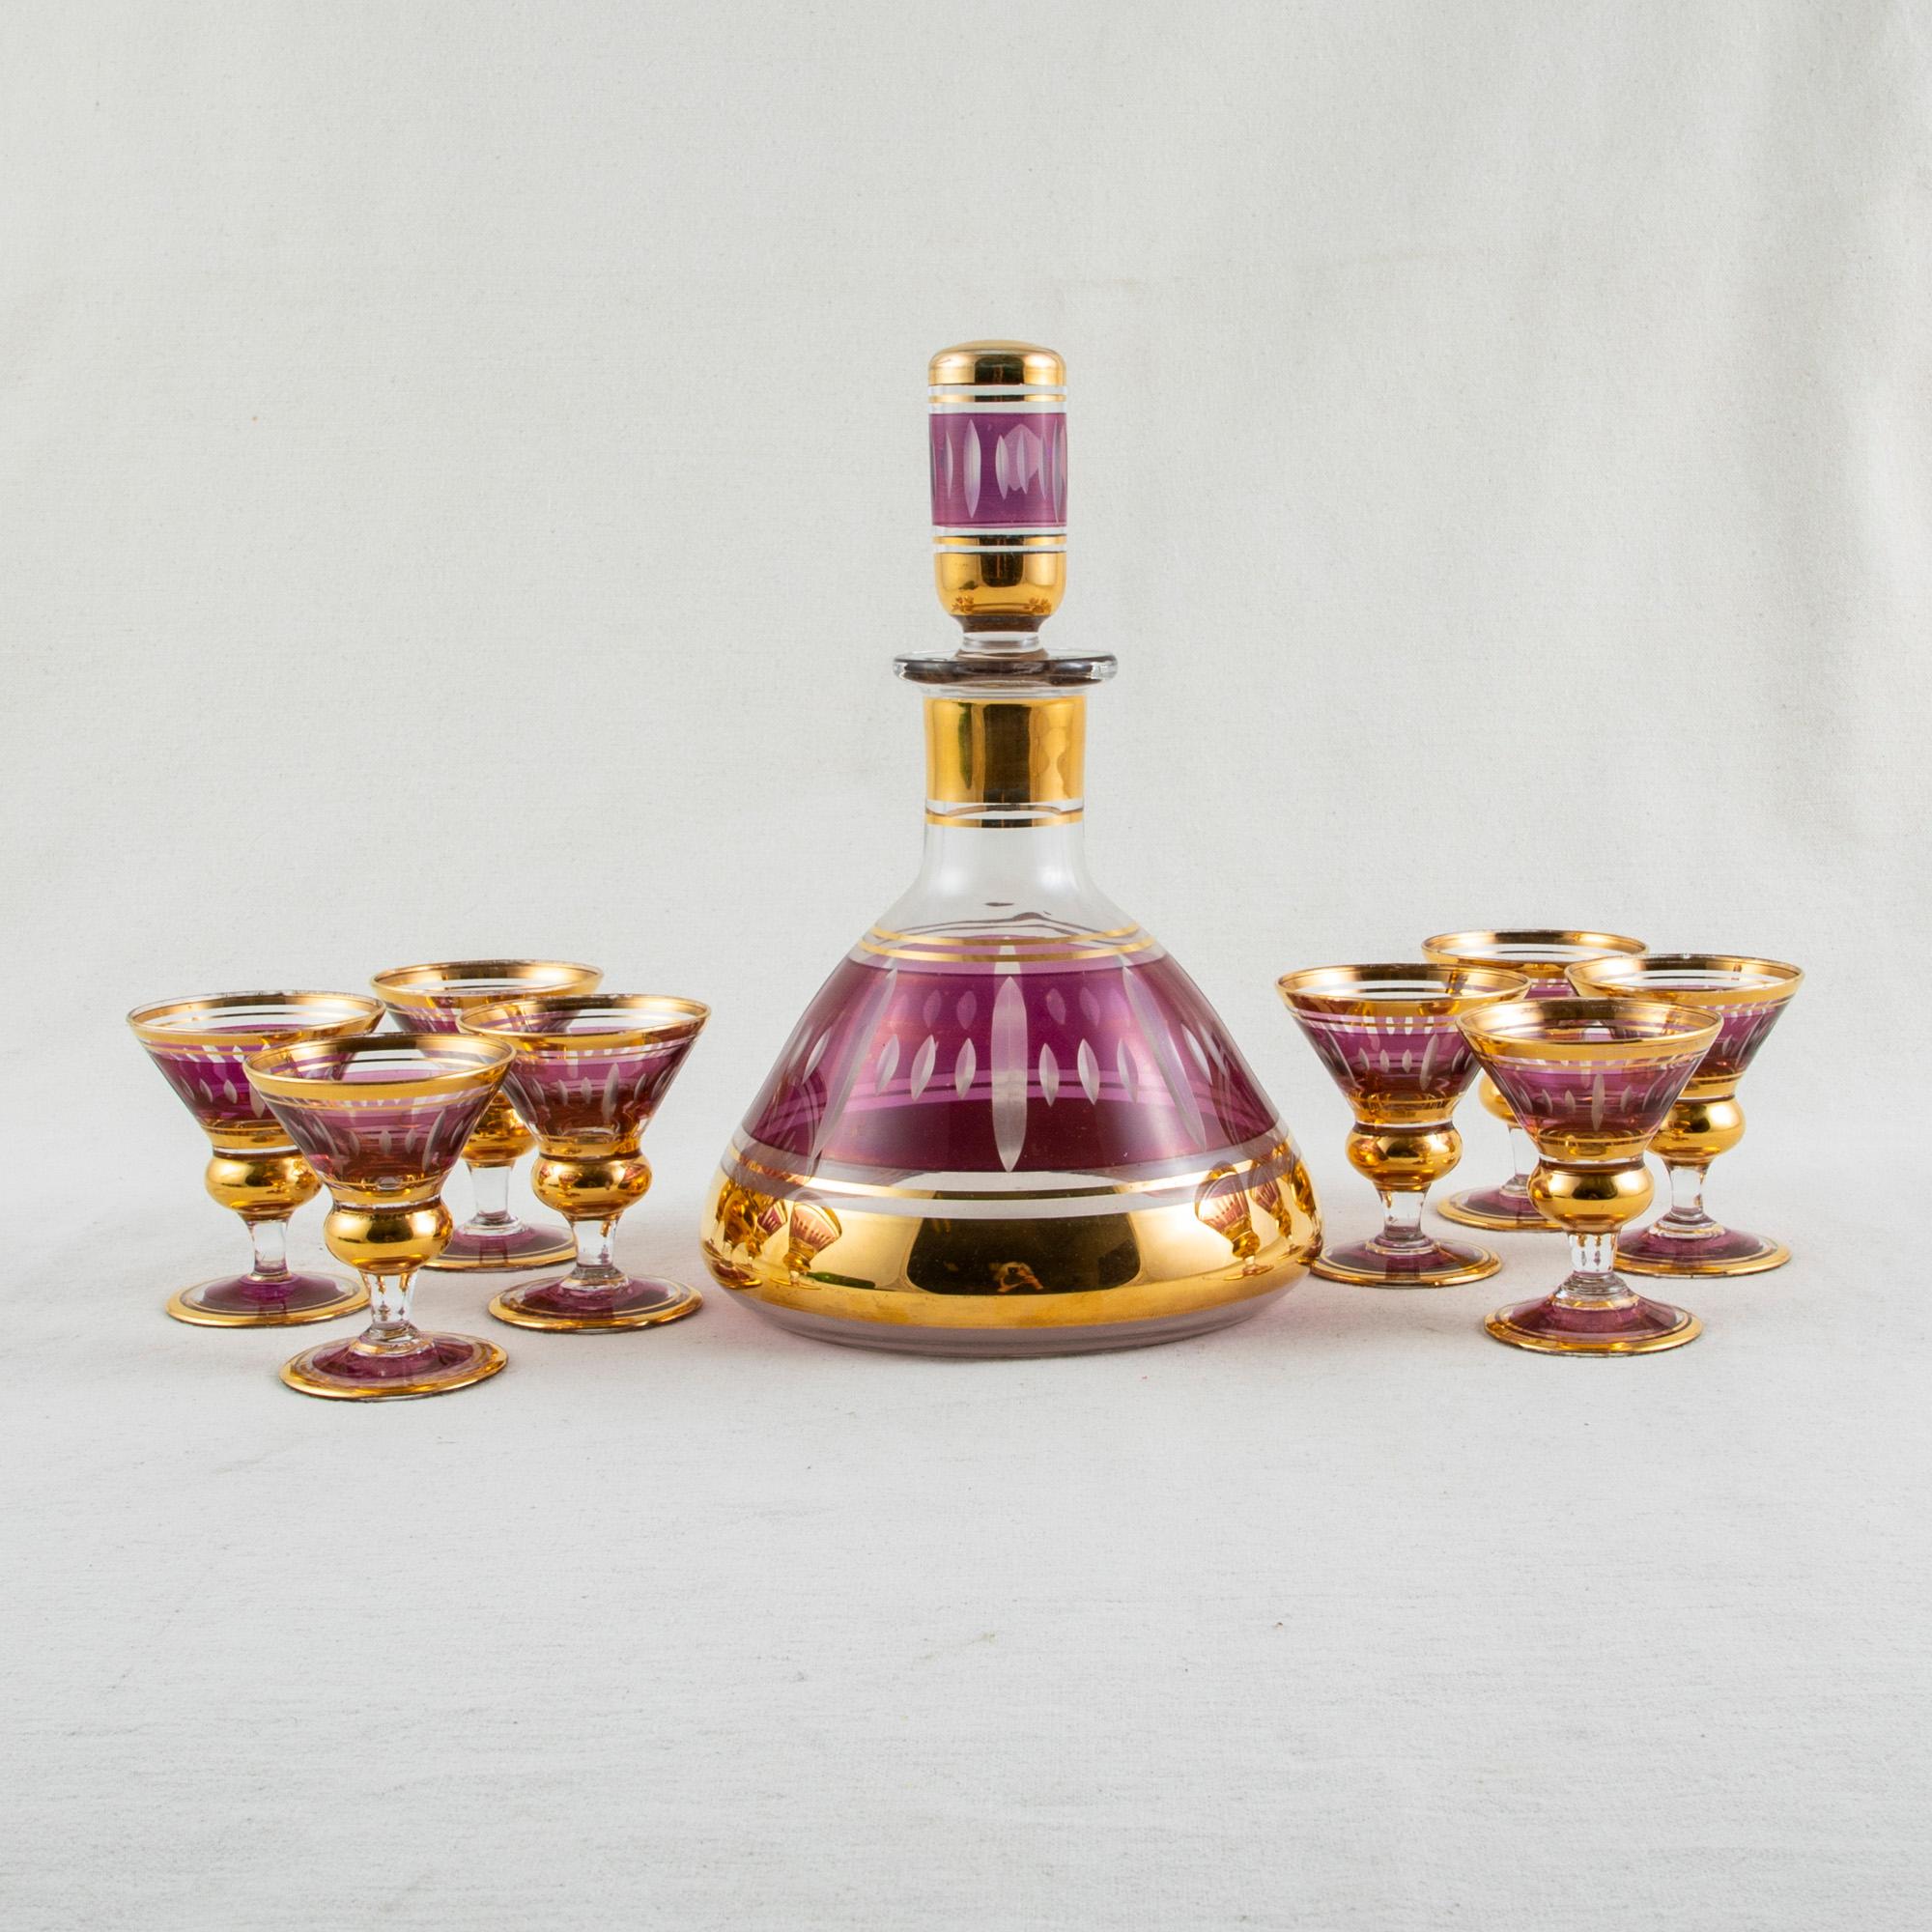 This mid-twentieth century French Art Deco period crystal liqueur service includes eight glasses and one carafe with stopper. The glasses and carafe are tinted with a band of purple and are detailed with bands of gold. Each glass measures 2.5 inches